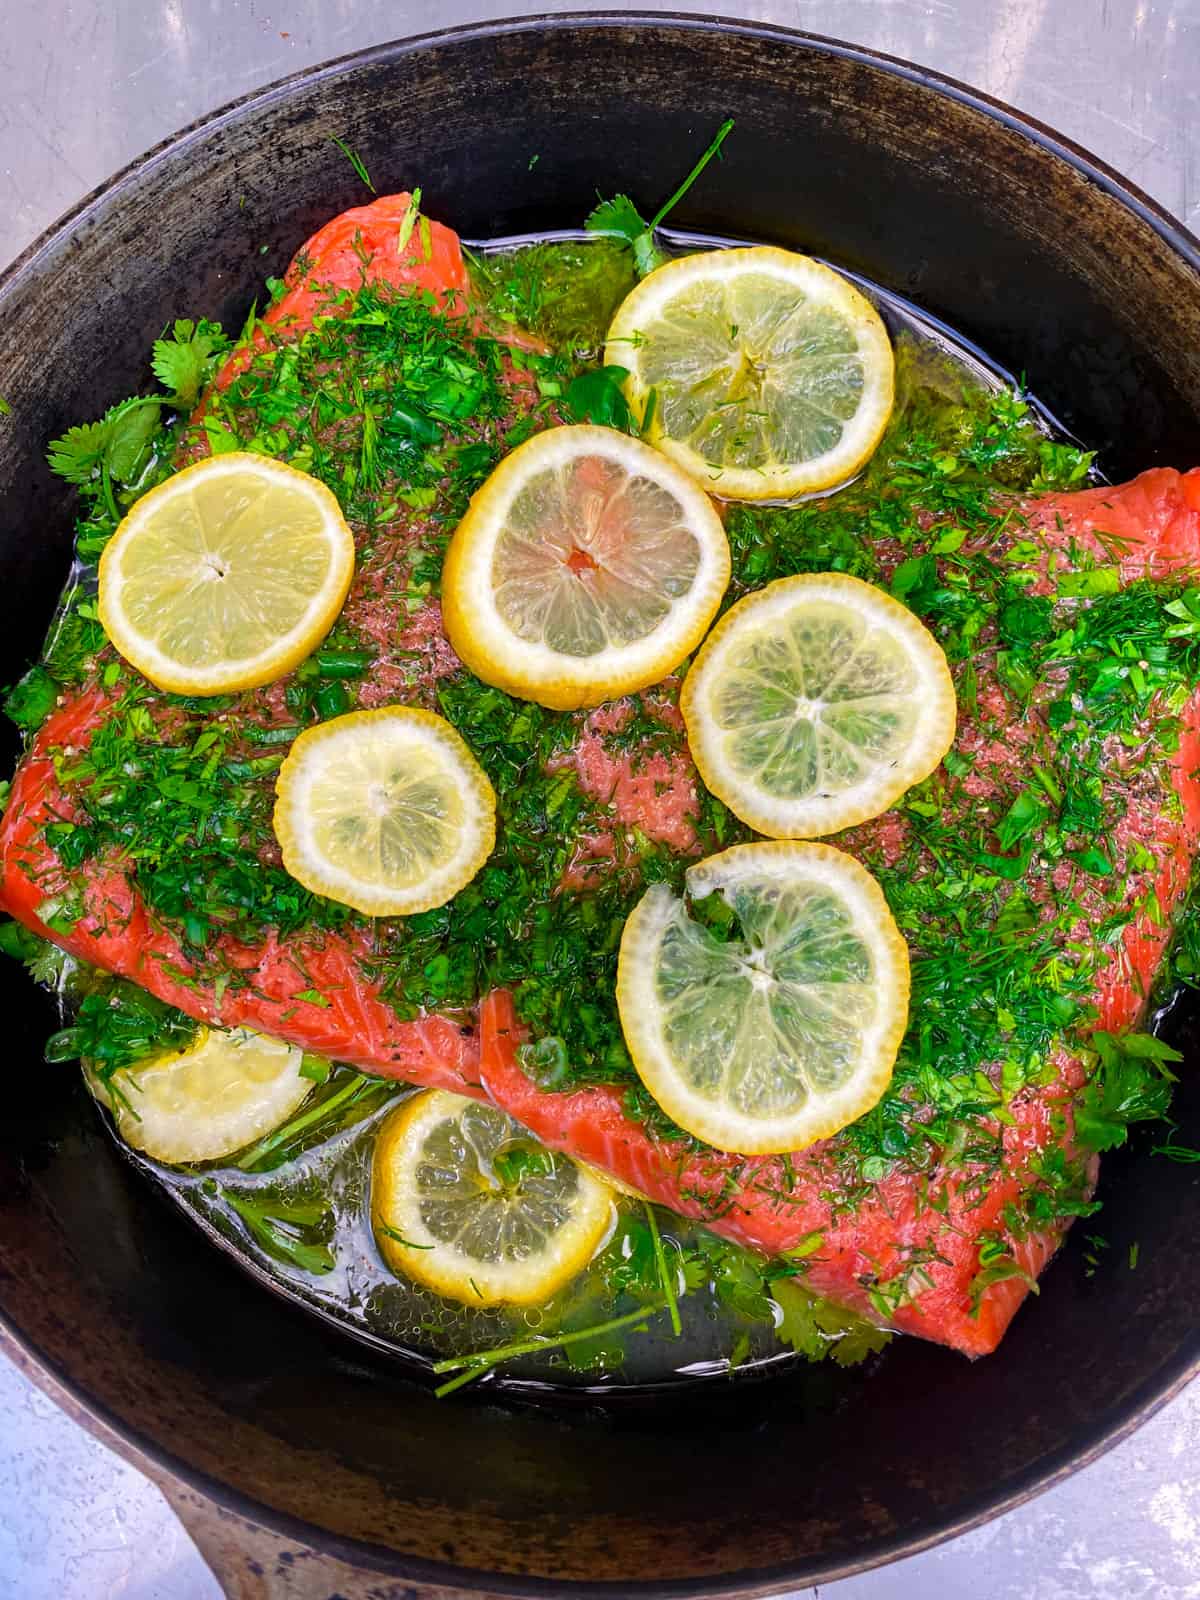 Cook the herb crusted salmon until the salmon is just cooked through, about 10-12 minutes.